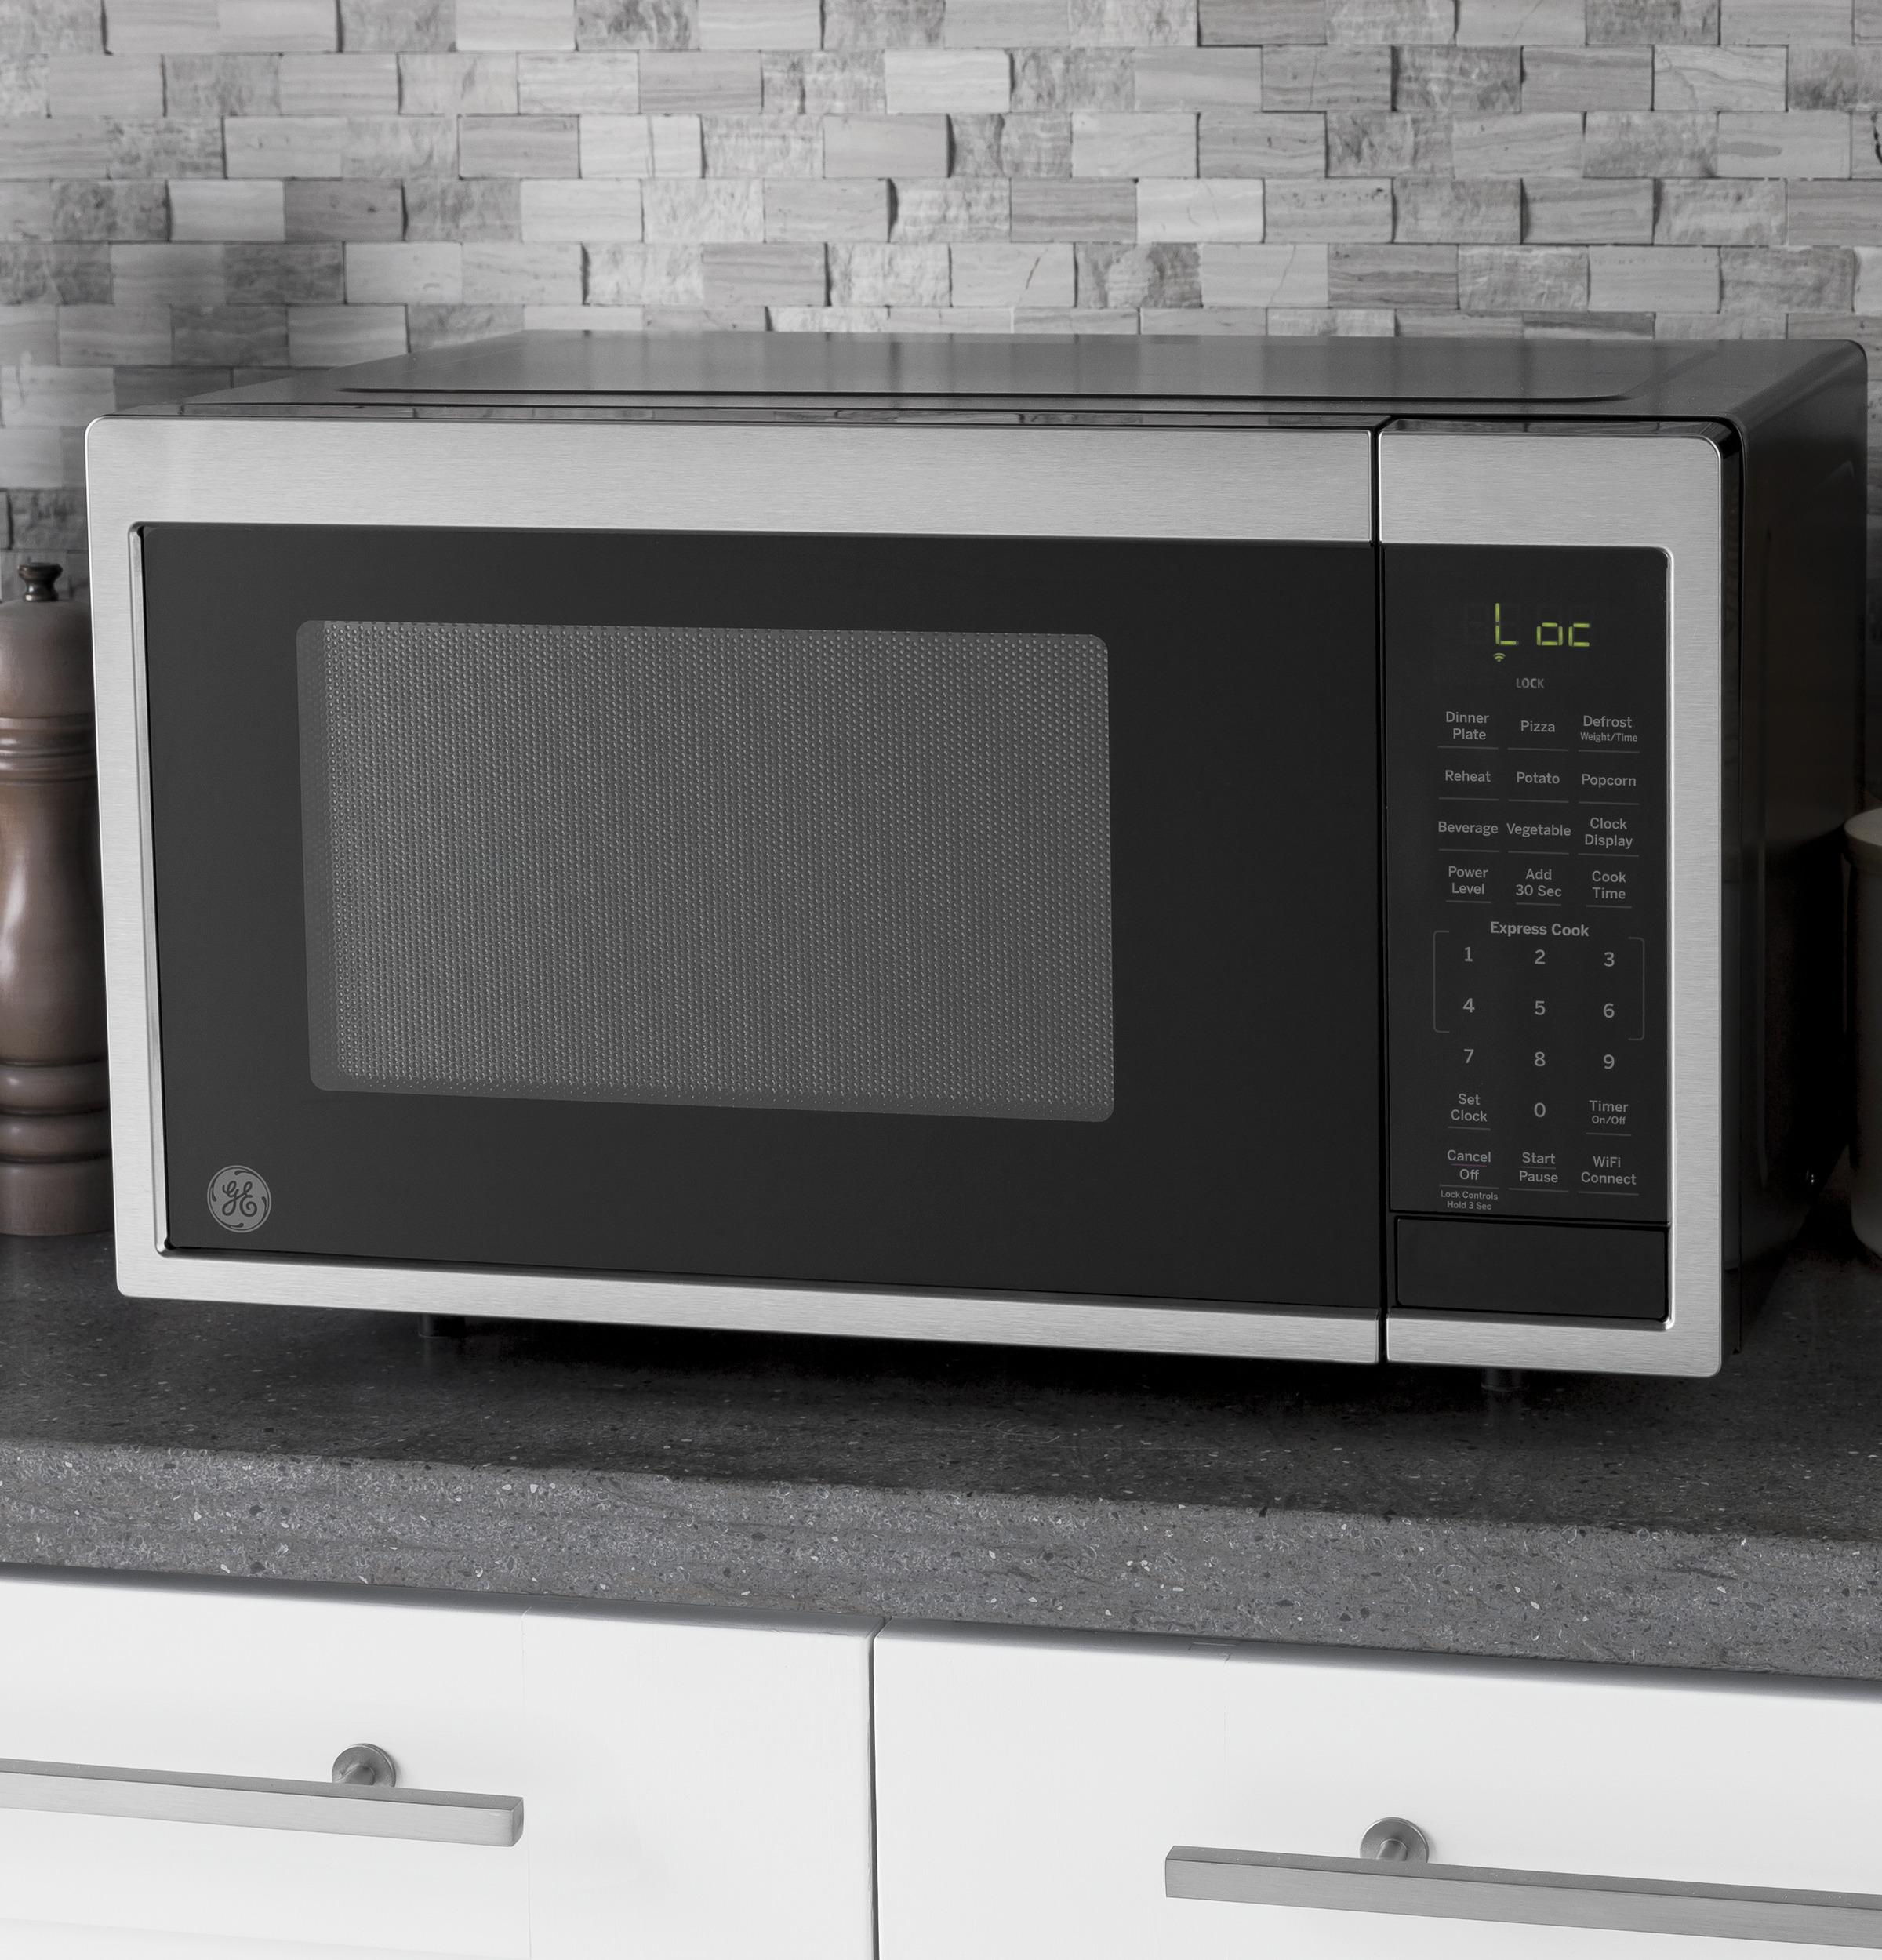 GE® 0.9 Cu. Ft. Capacity Smart Countertop Microwave Oven with Scan-To-Cook Technology